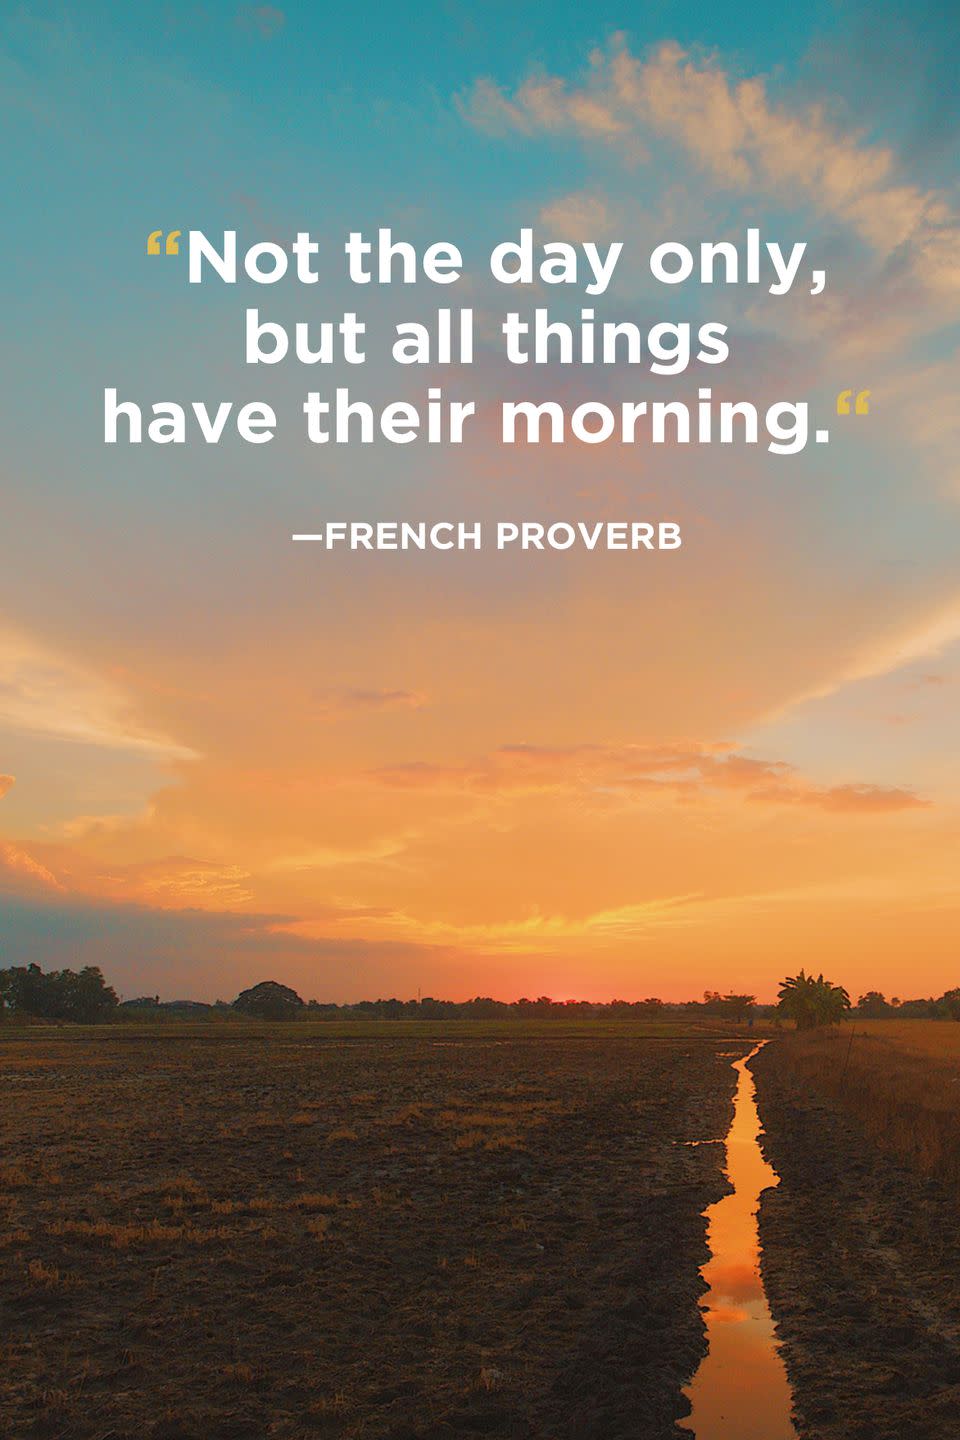 <p>"Not the day only, but all things have their morning."</p>